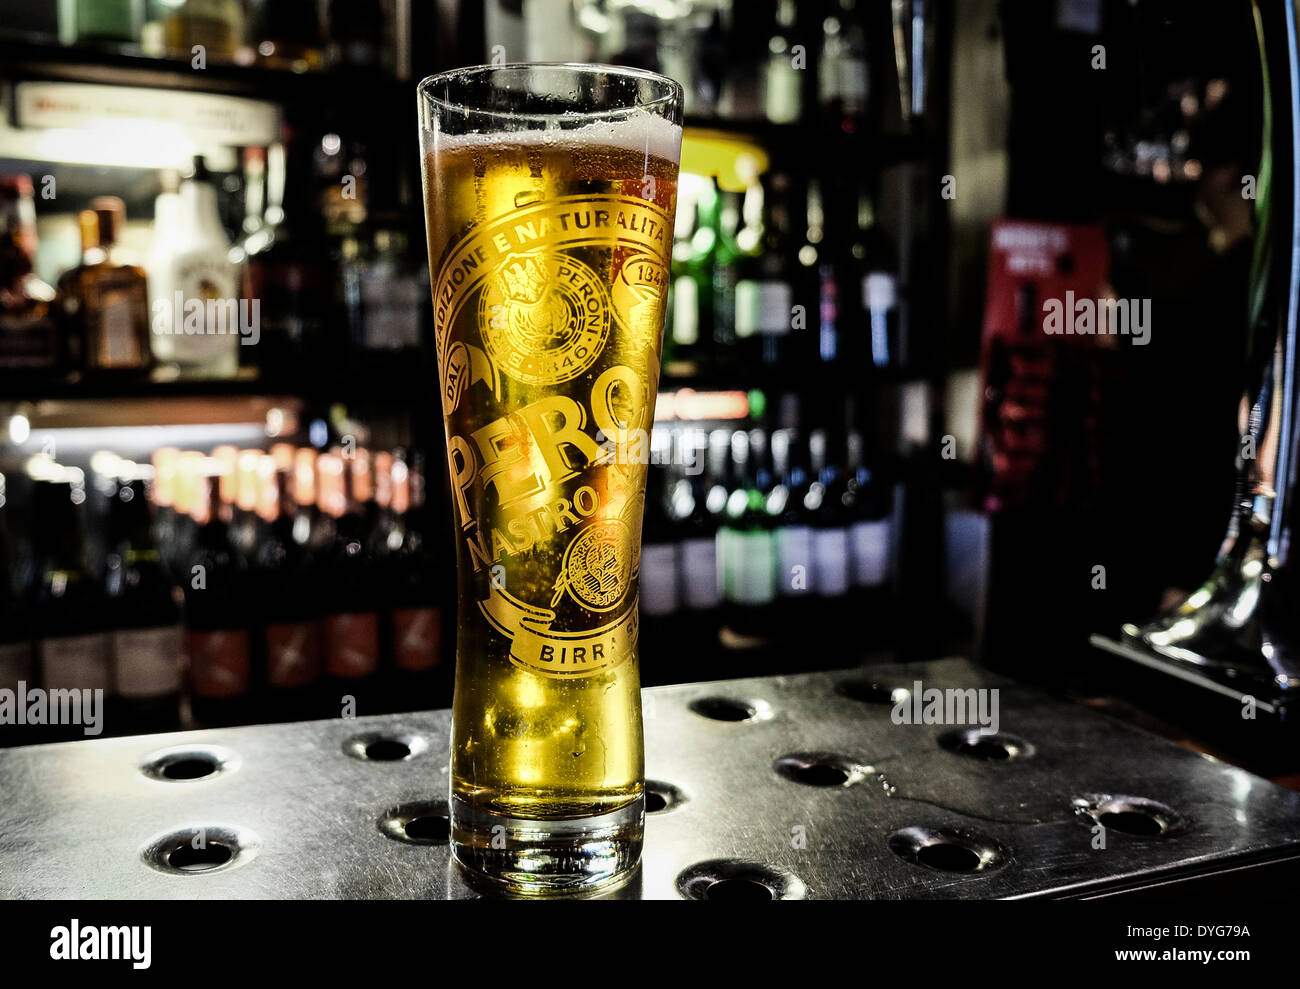 A pint glass of Peroni beer on a bar in a pub. Stock Photo